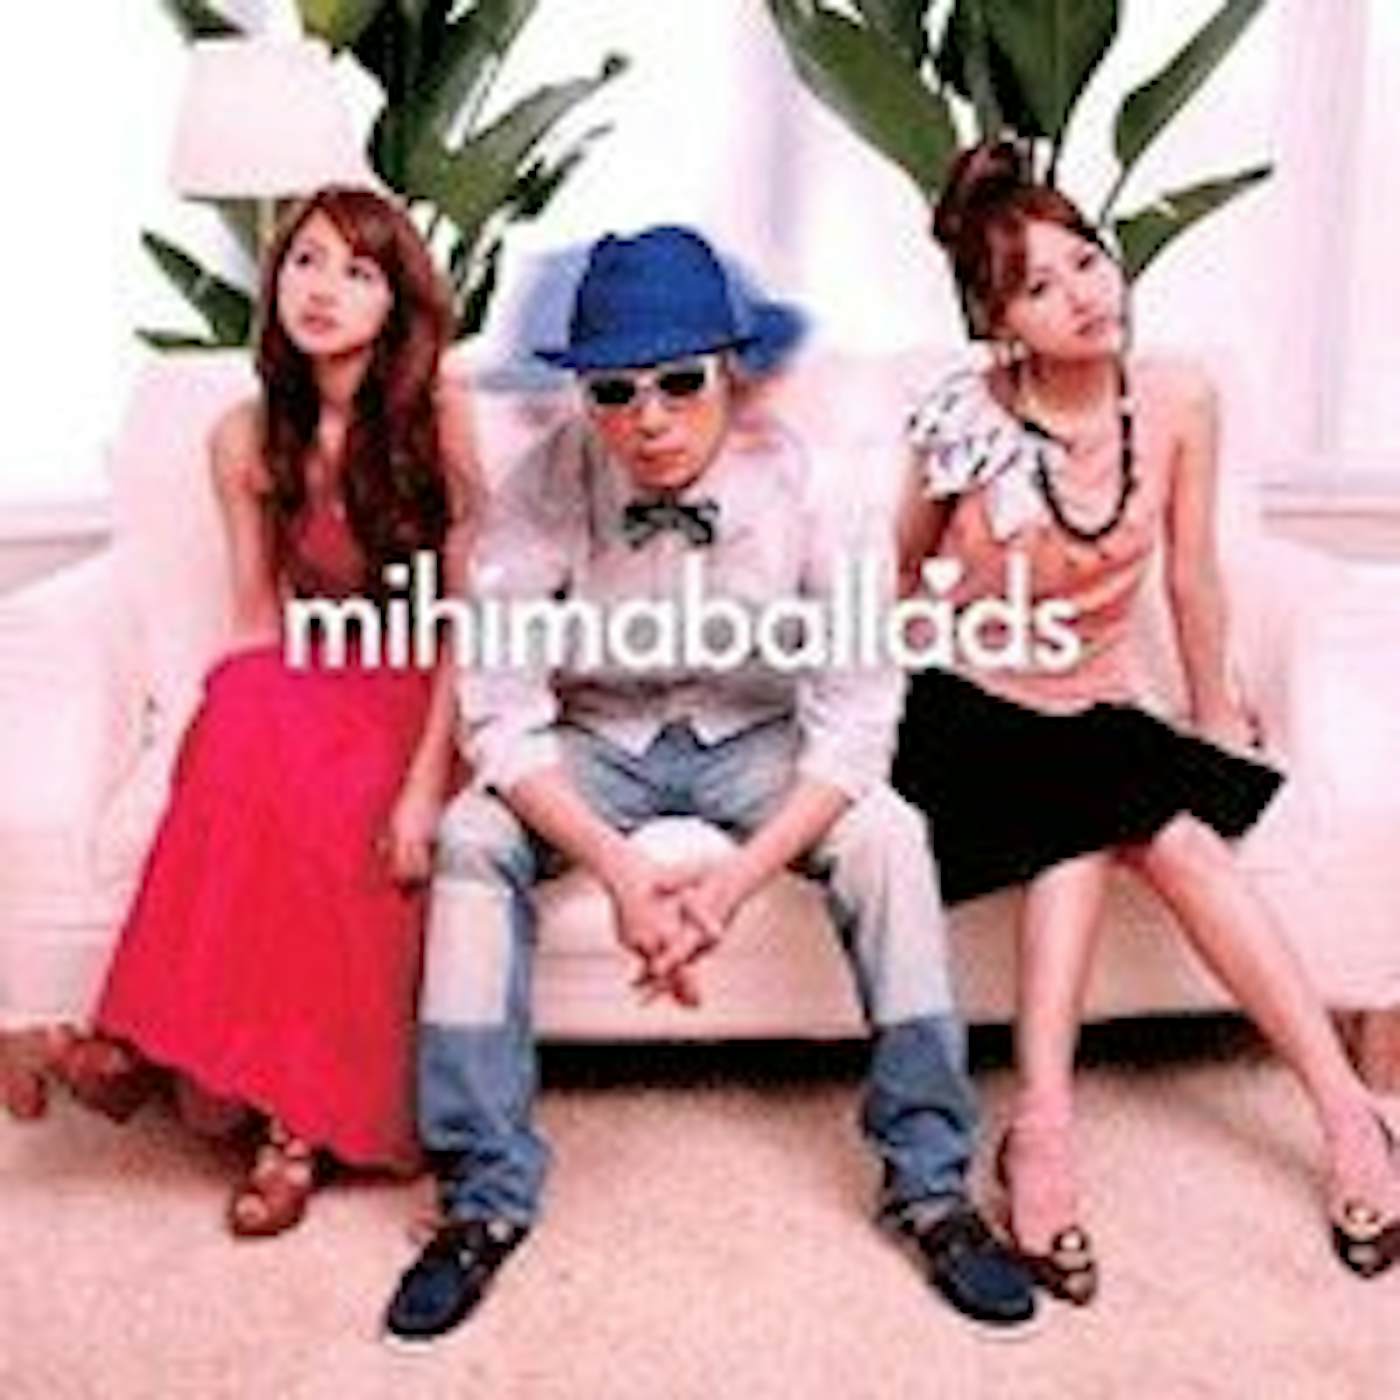 Mihimaru GT MIHIMABALLADS CD